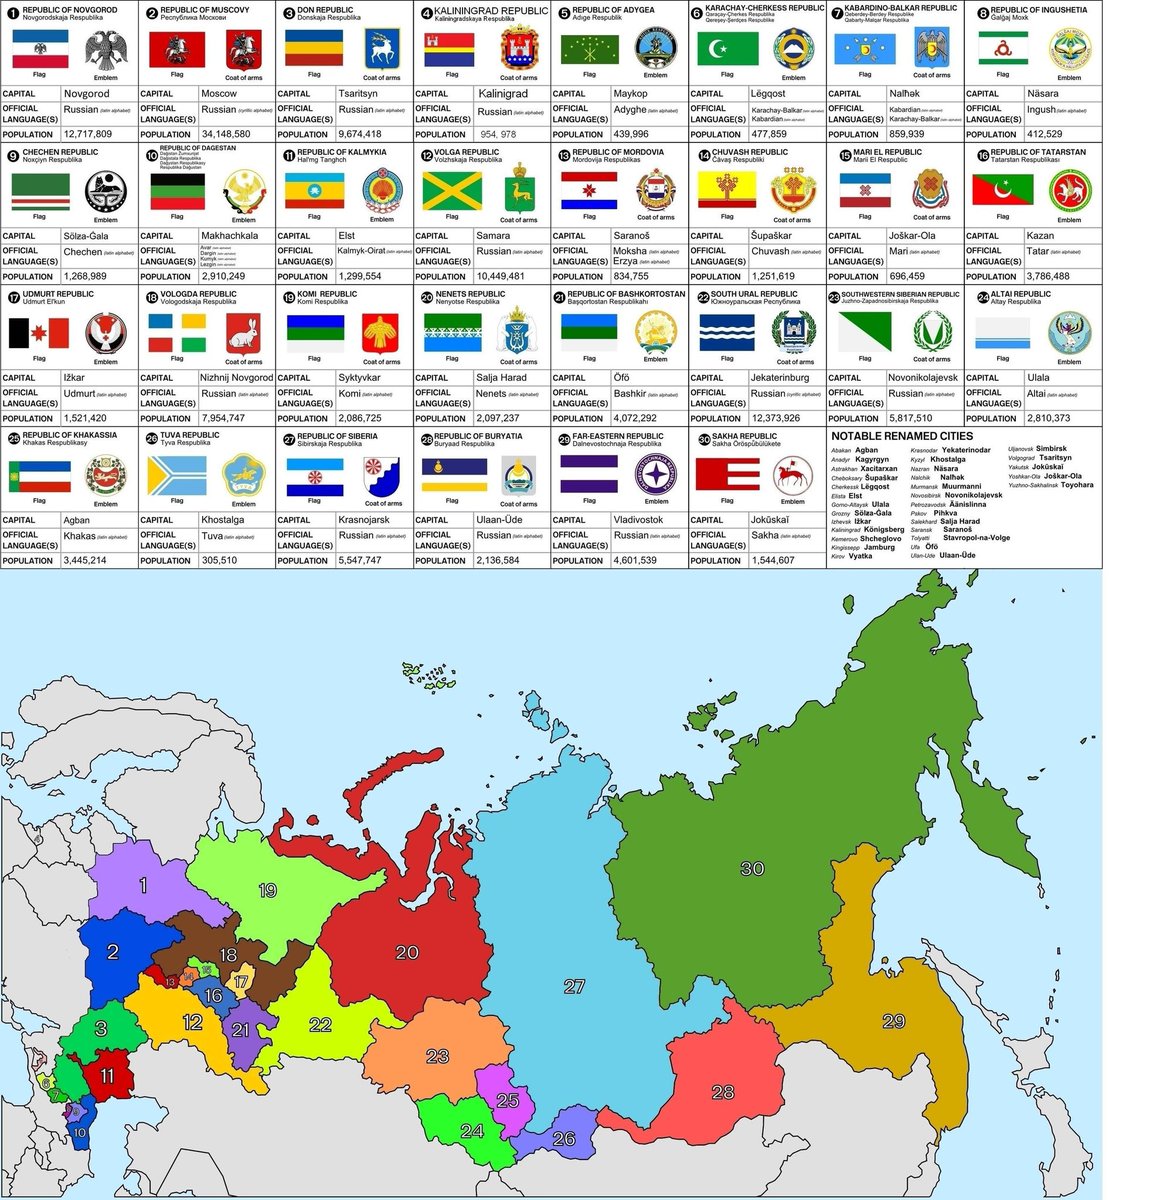 The way you see Russians massacring Ukrainians then telling the survivors that they are Russians is how Russia built 'Russia'. 1. INVADE AND CHANGE - Acquire territory, abolish their collective identity with deportation, massacres, cancel language, traditions. 2. NAMES MATTER -